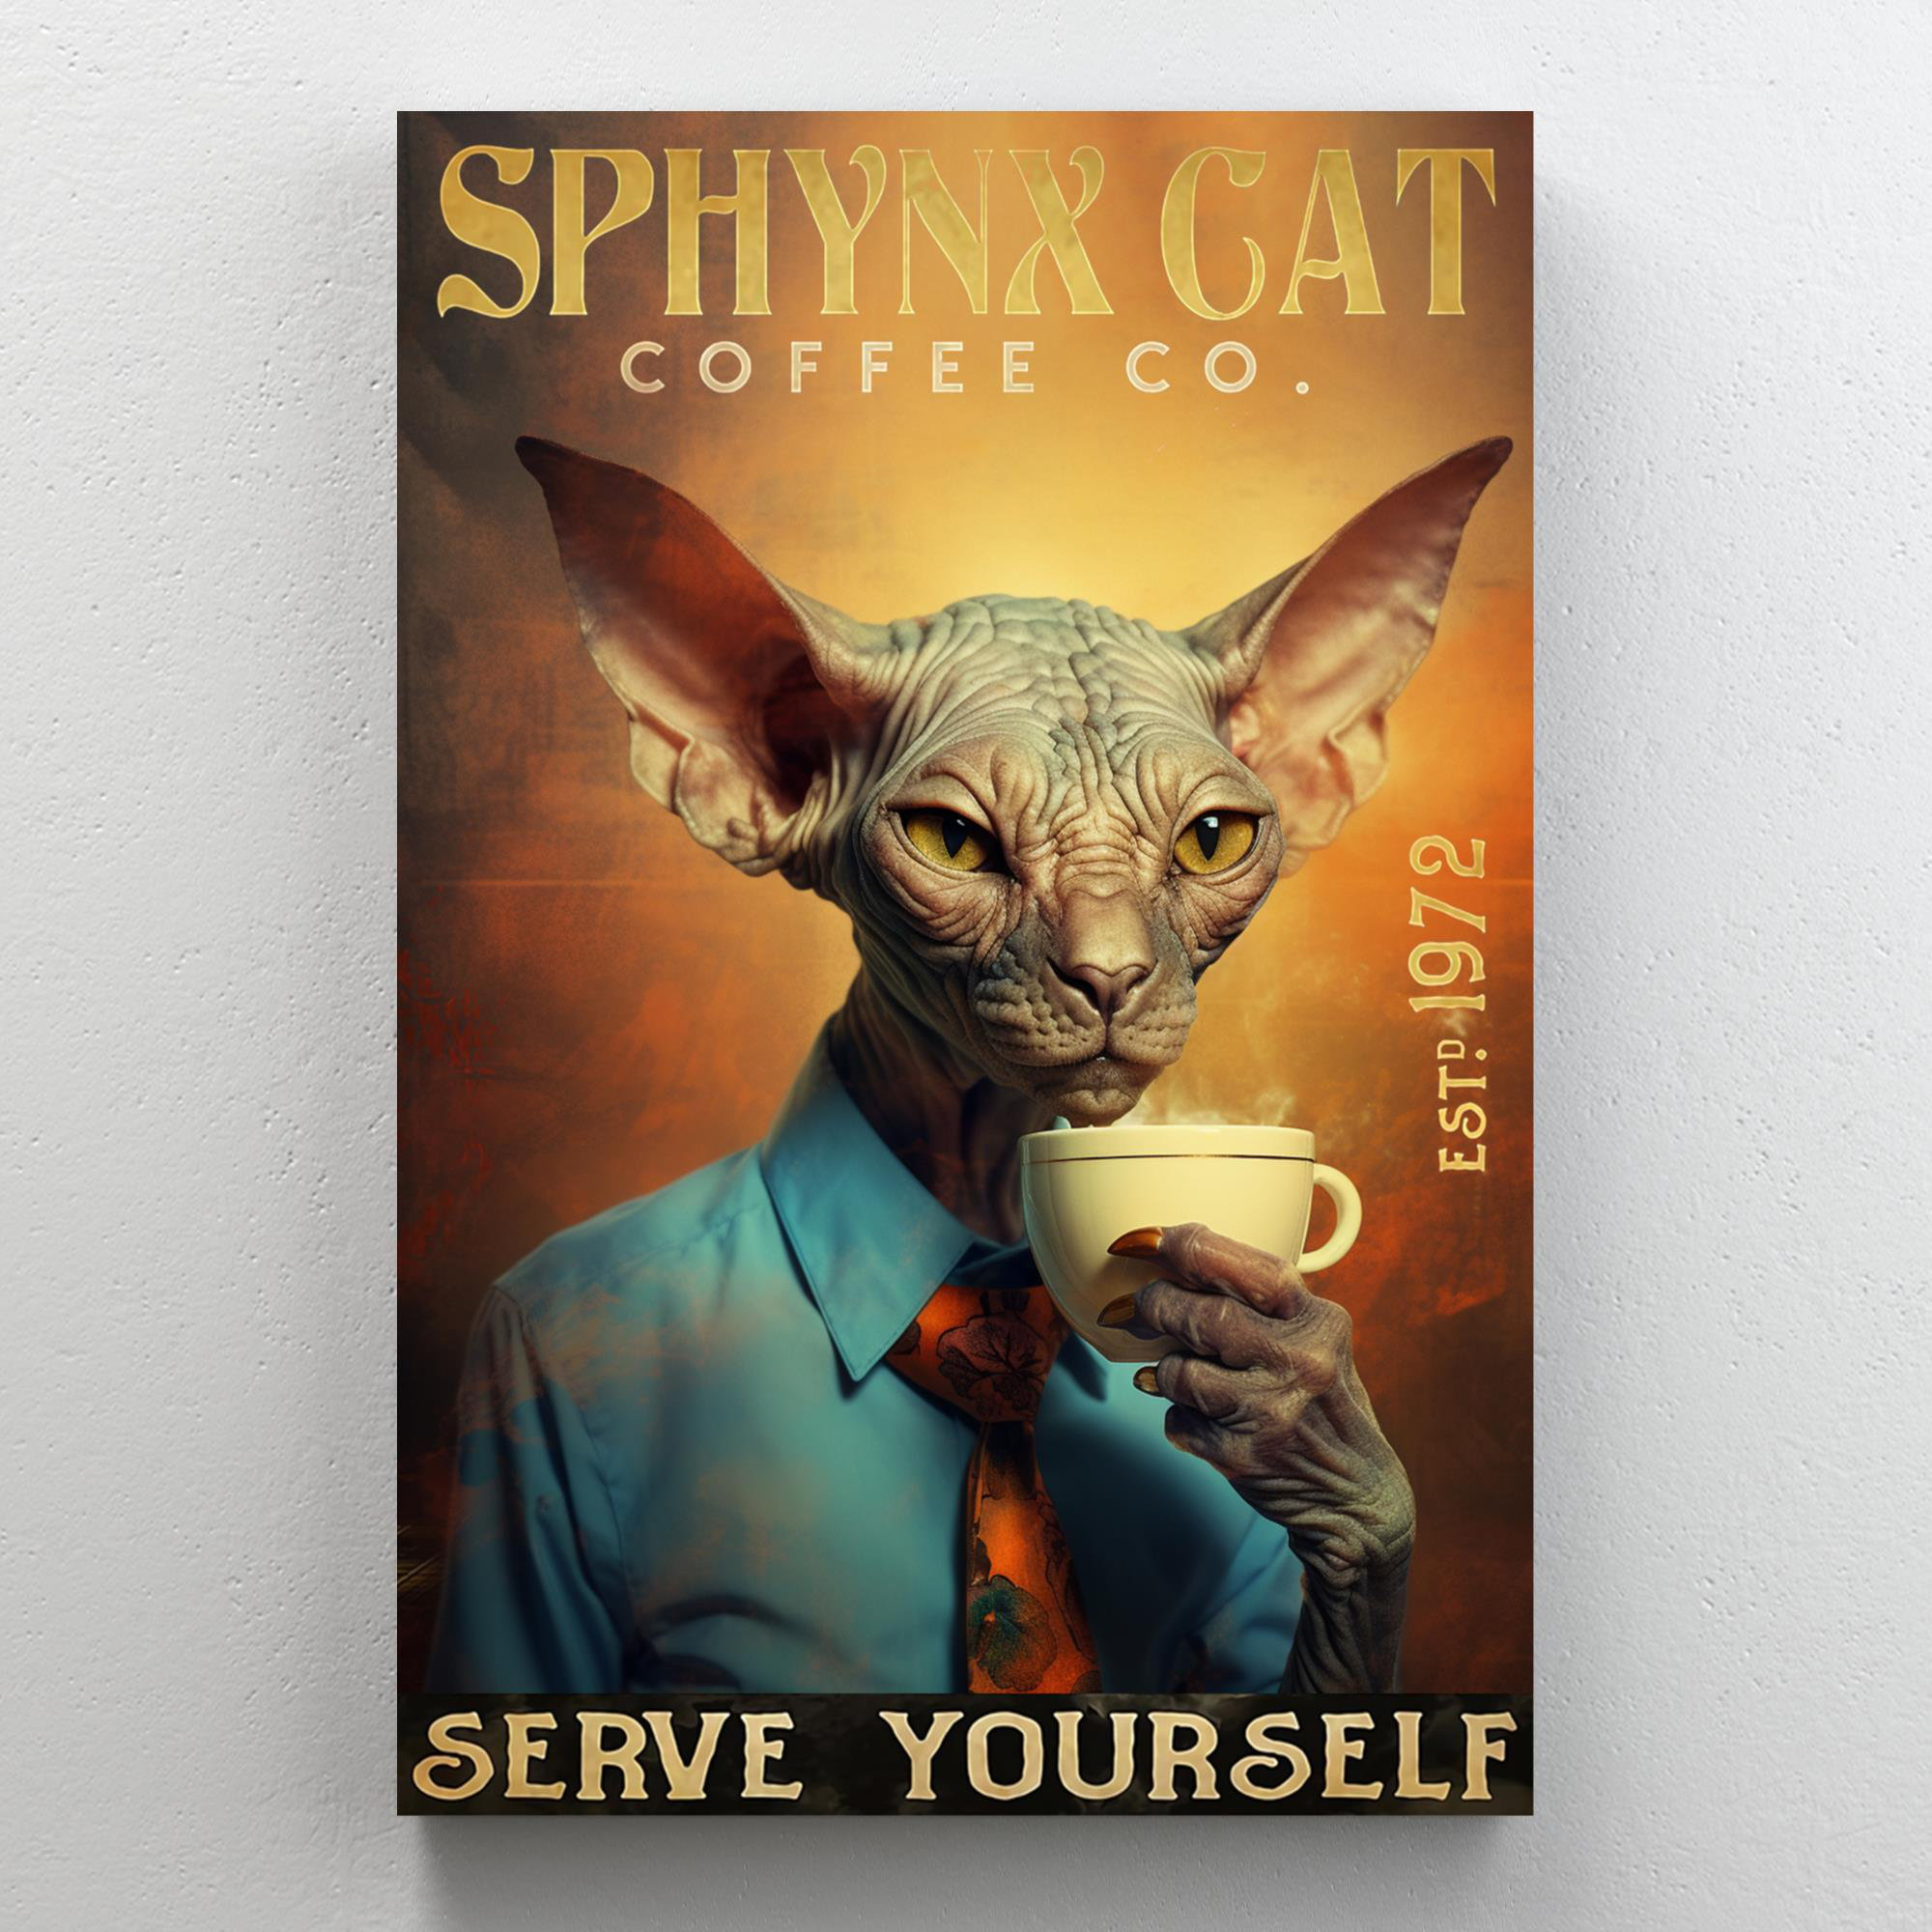 Tuxedo Cat Drink Coffee and Know Things - Wrapped Canvas Textual Art Trinx Size: 14 H x 11 W x 1.25 D